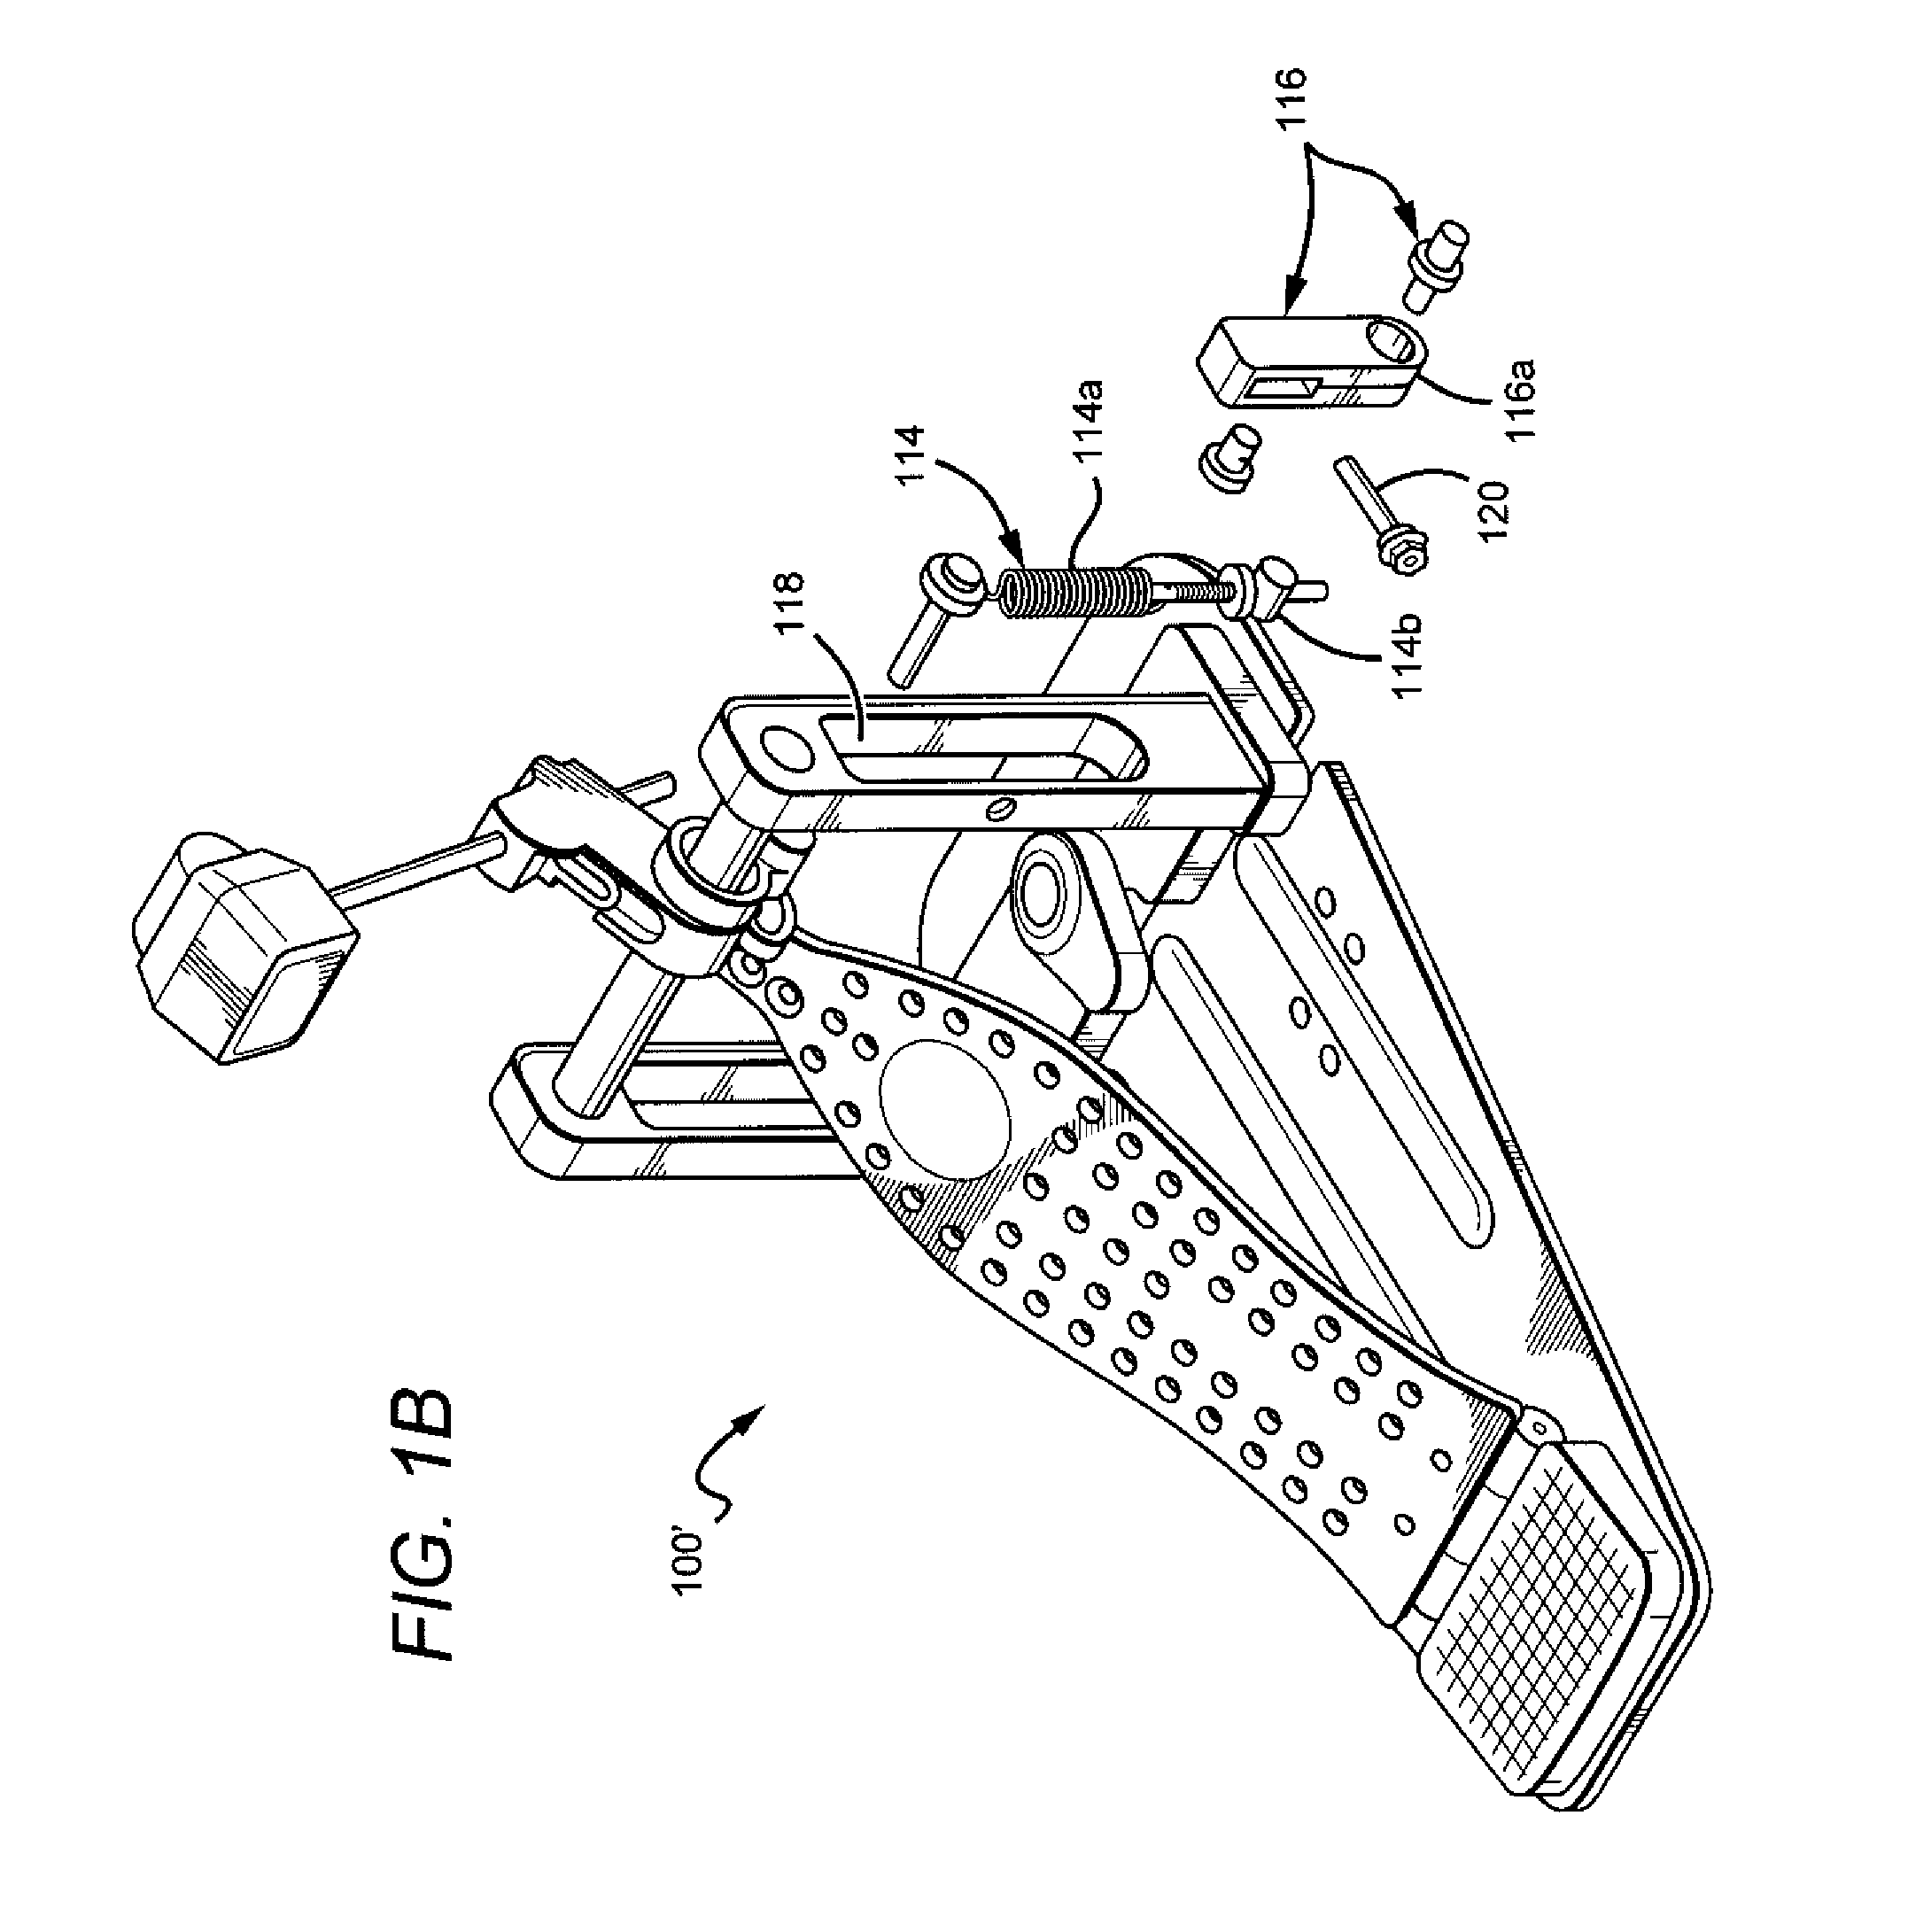 Drum pedal with adjustment features and interlocking features